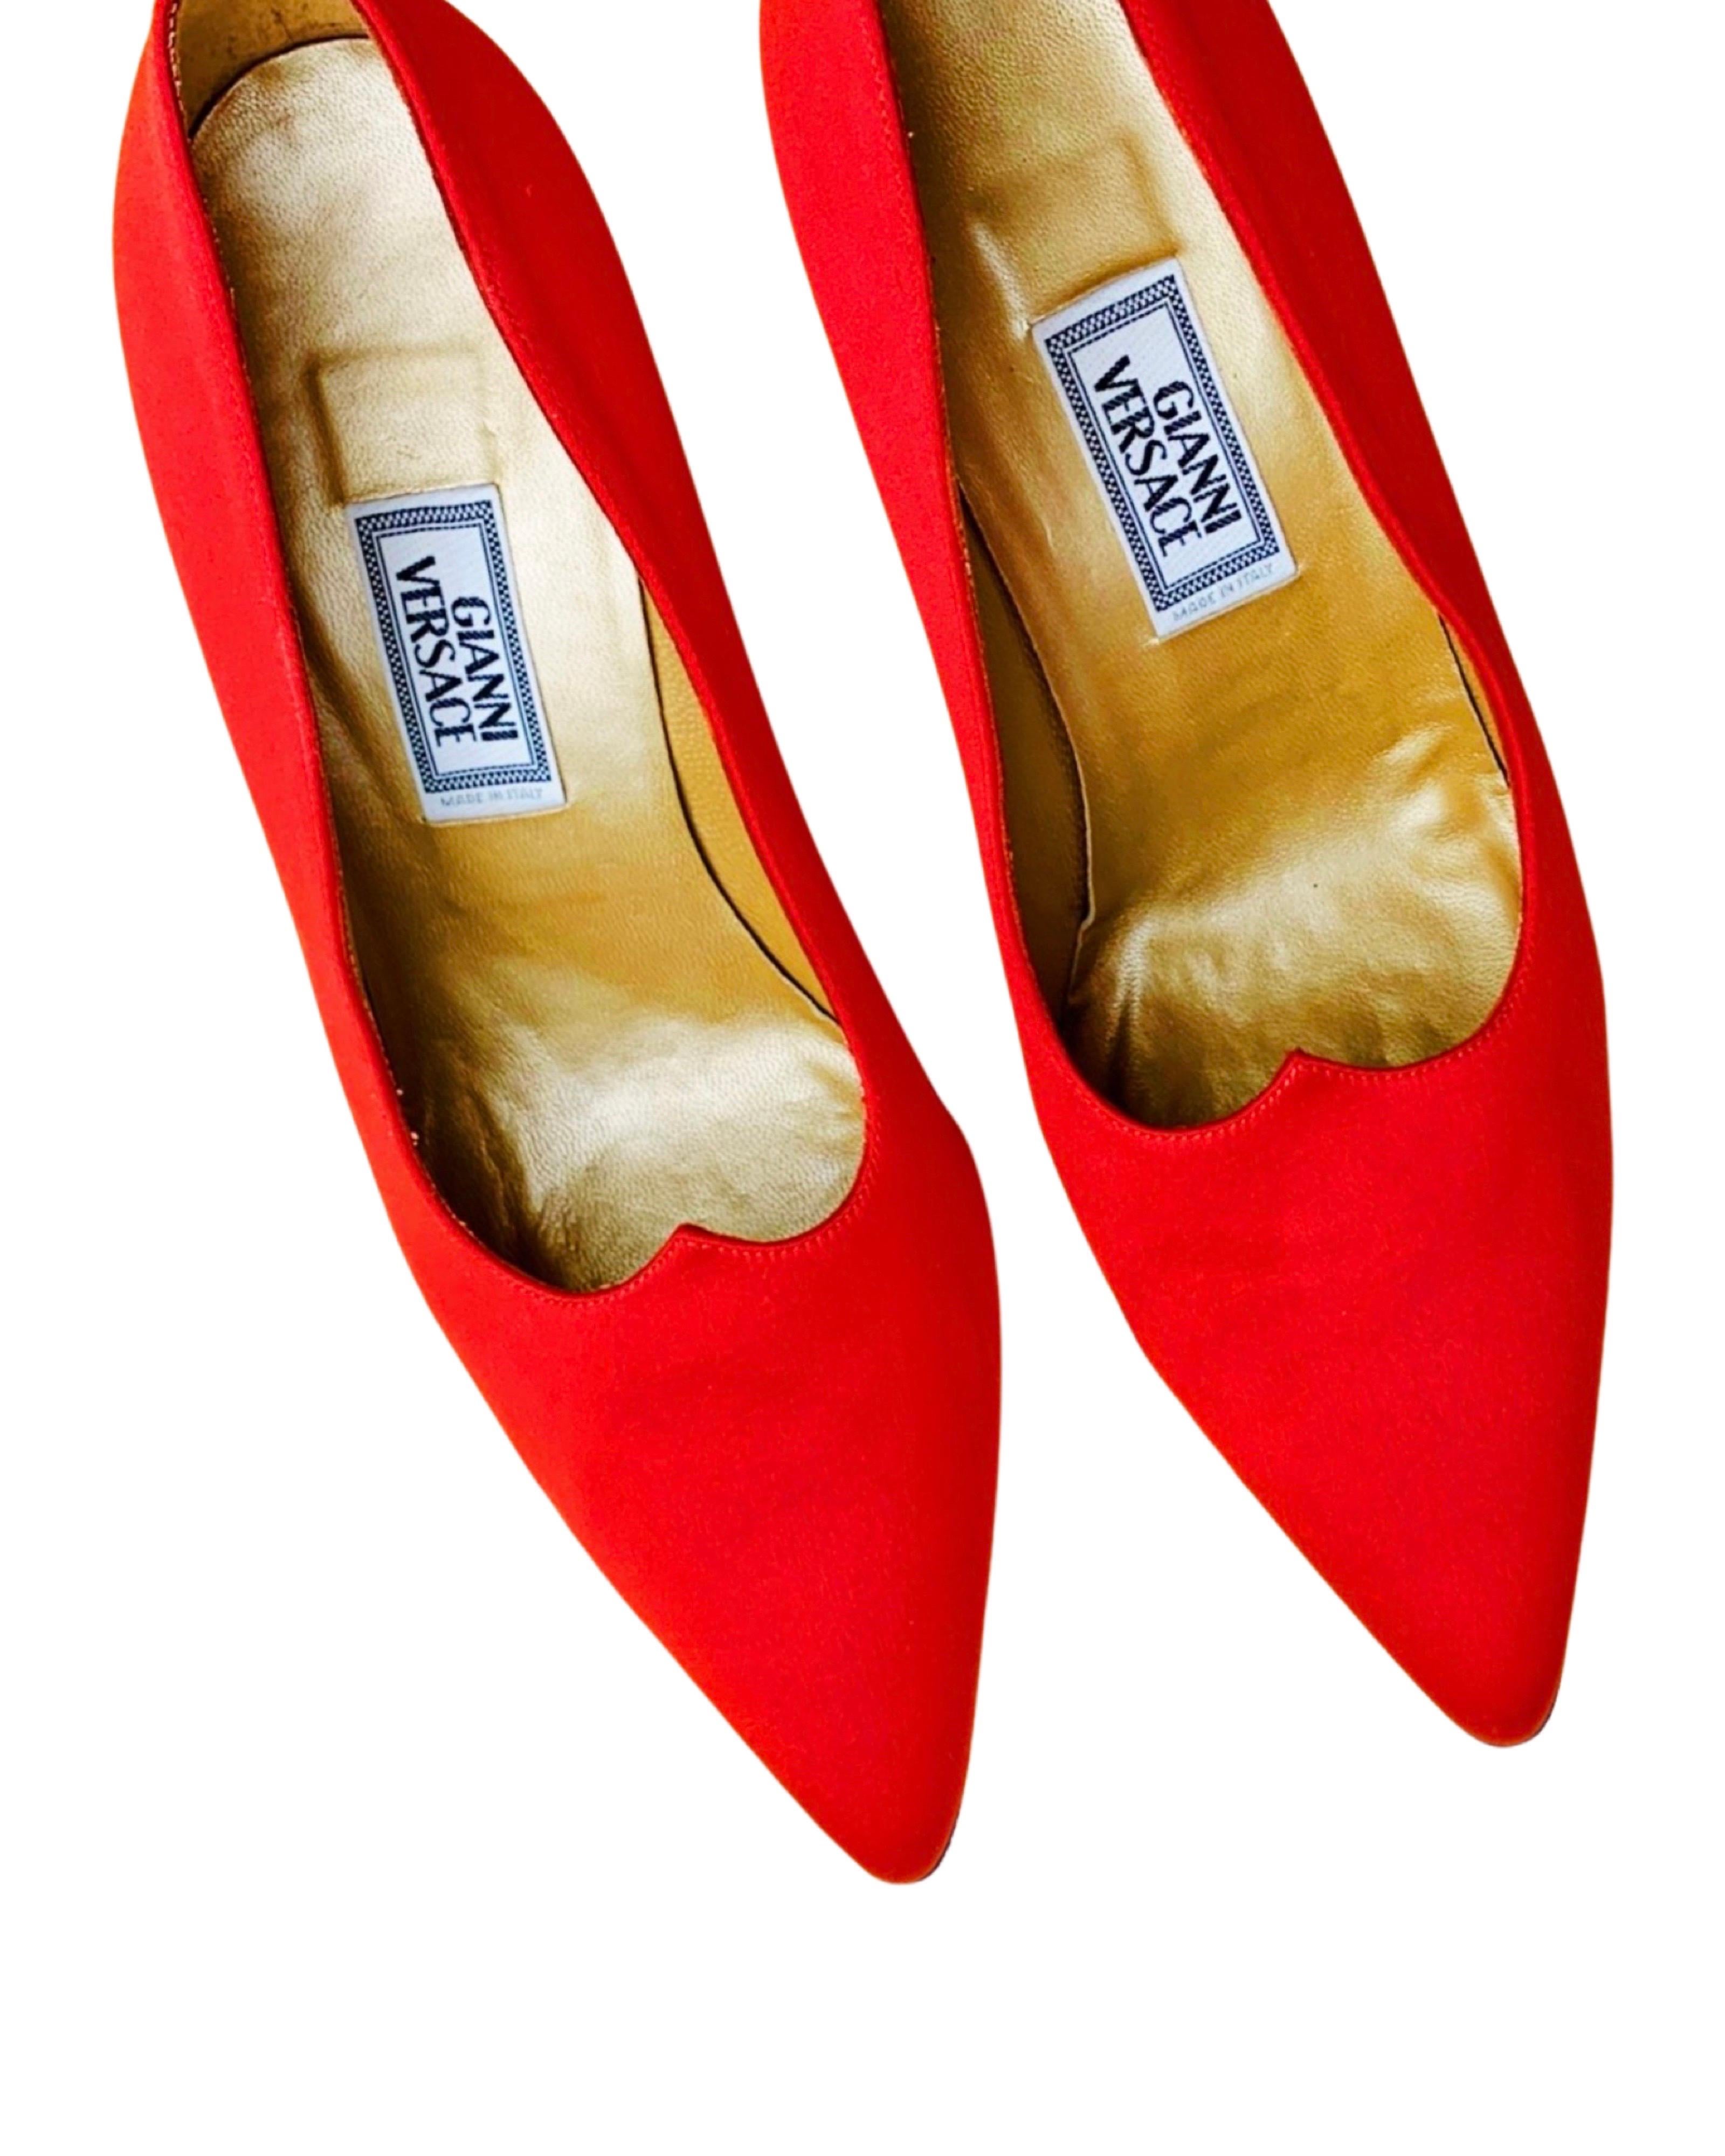 SS 1995 Gianni Versace Sweetheart Pumps In Excellent Condition For Sale In Prague, CZ